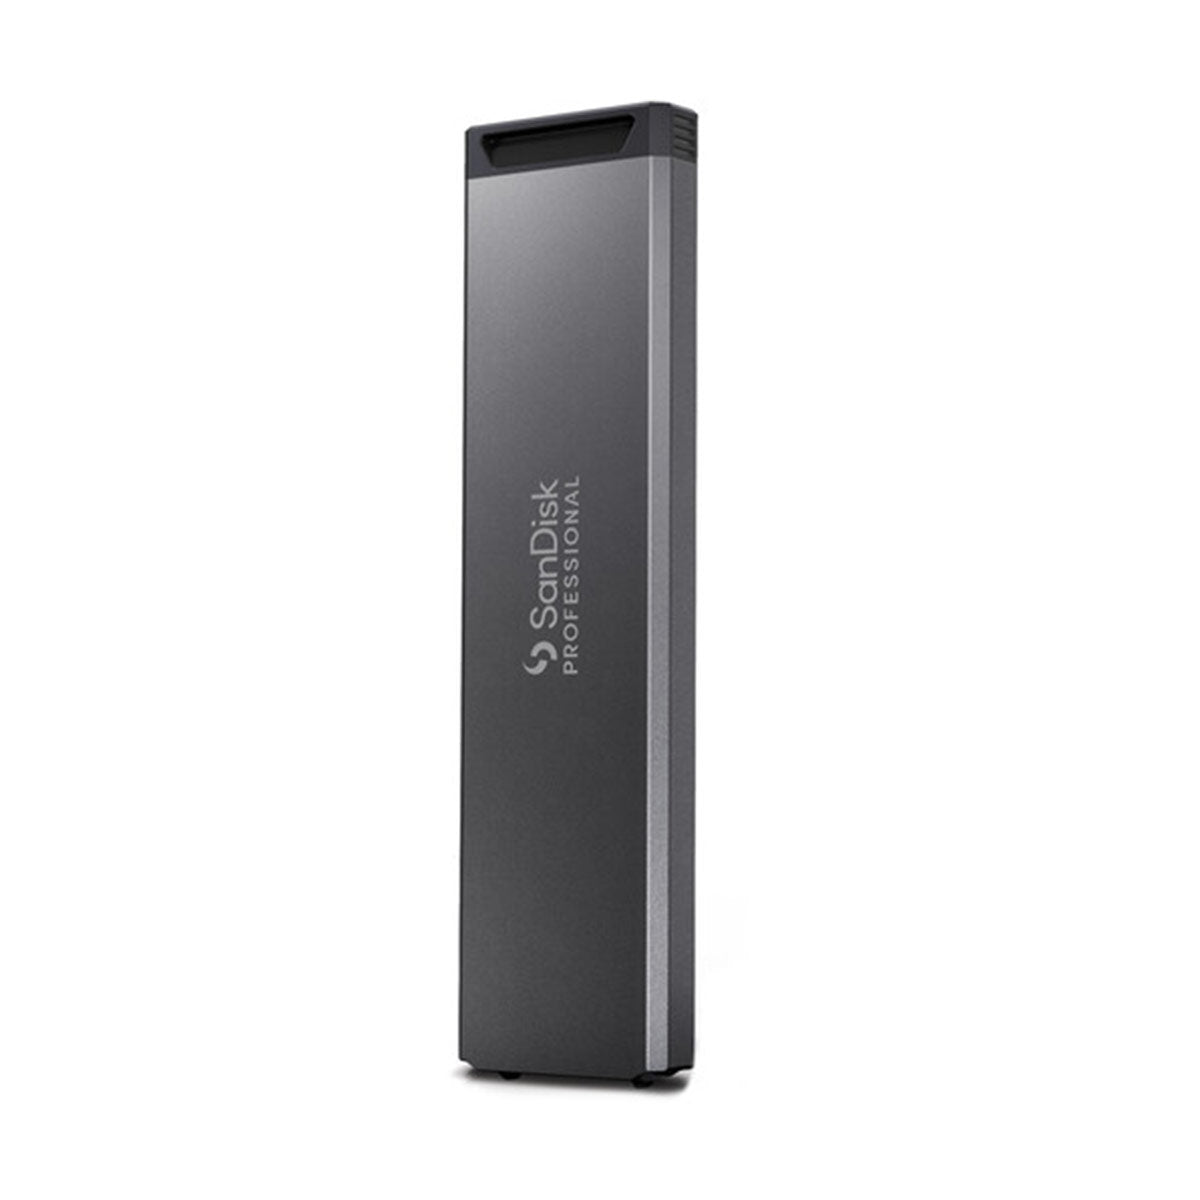 SanDisk Professional 4TB PRO-BLADE SSD and TRANSPORT